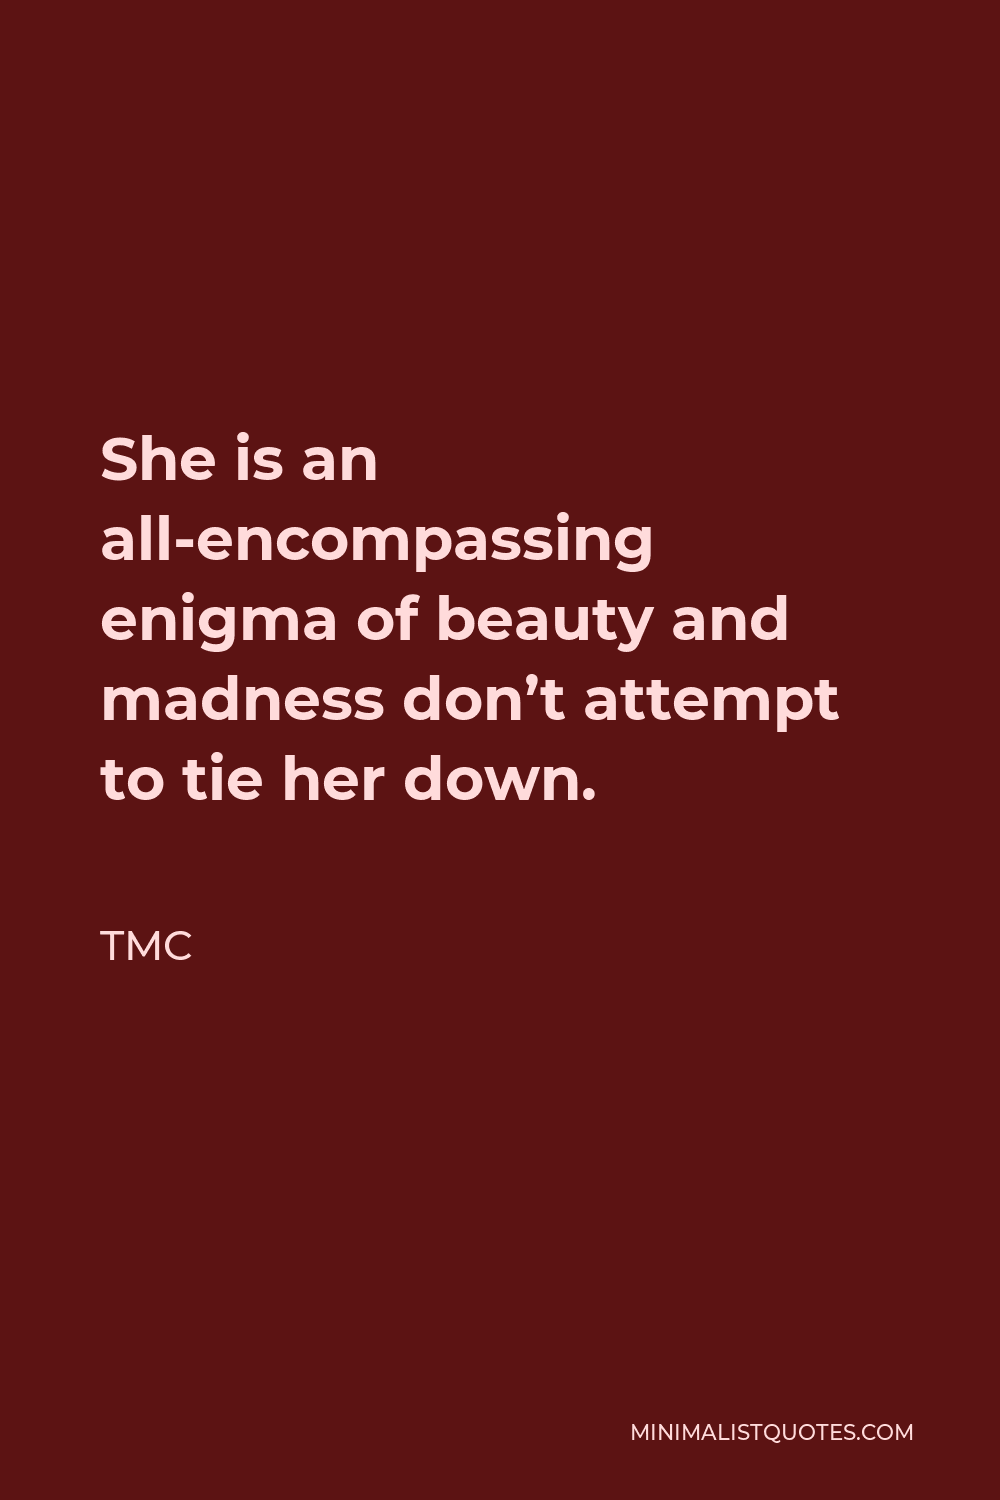 TMC Quote - She is an all encompassing enigma of beauty and madness don’t attempt to tie her down.